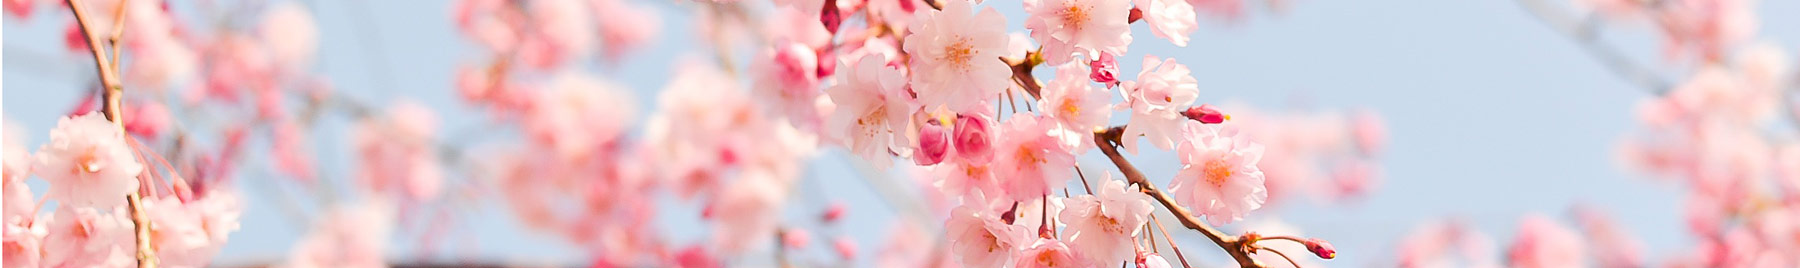 Pink cherry blossoms against a spring blue sky.